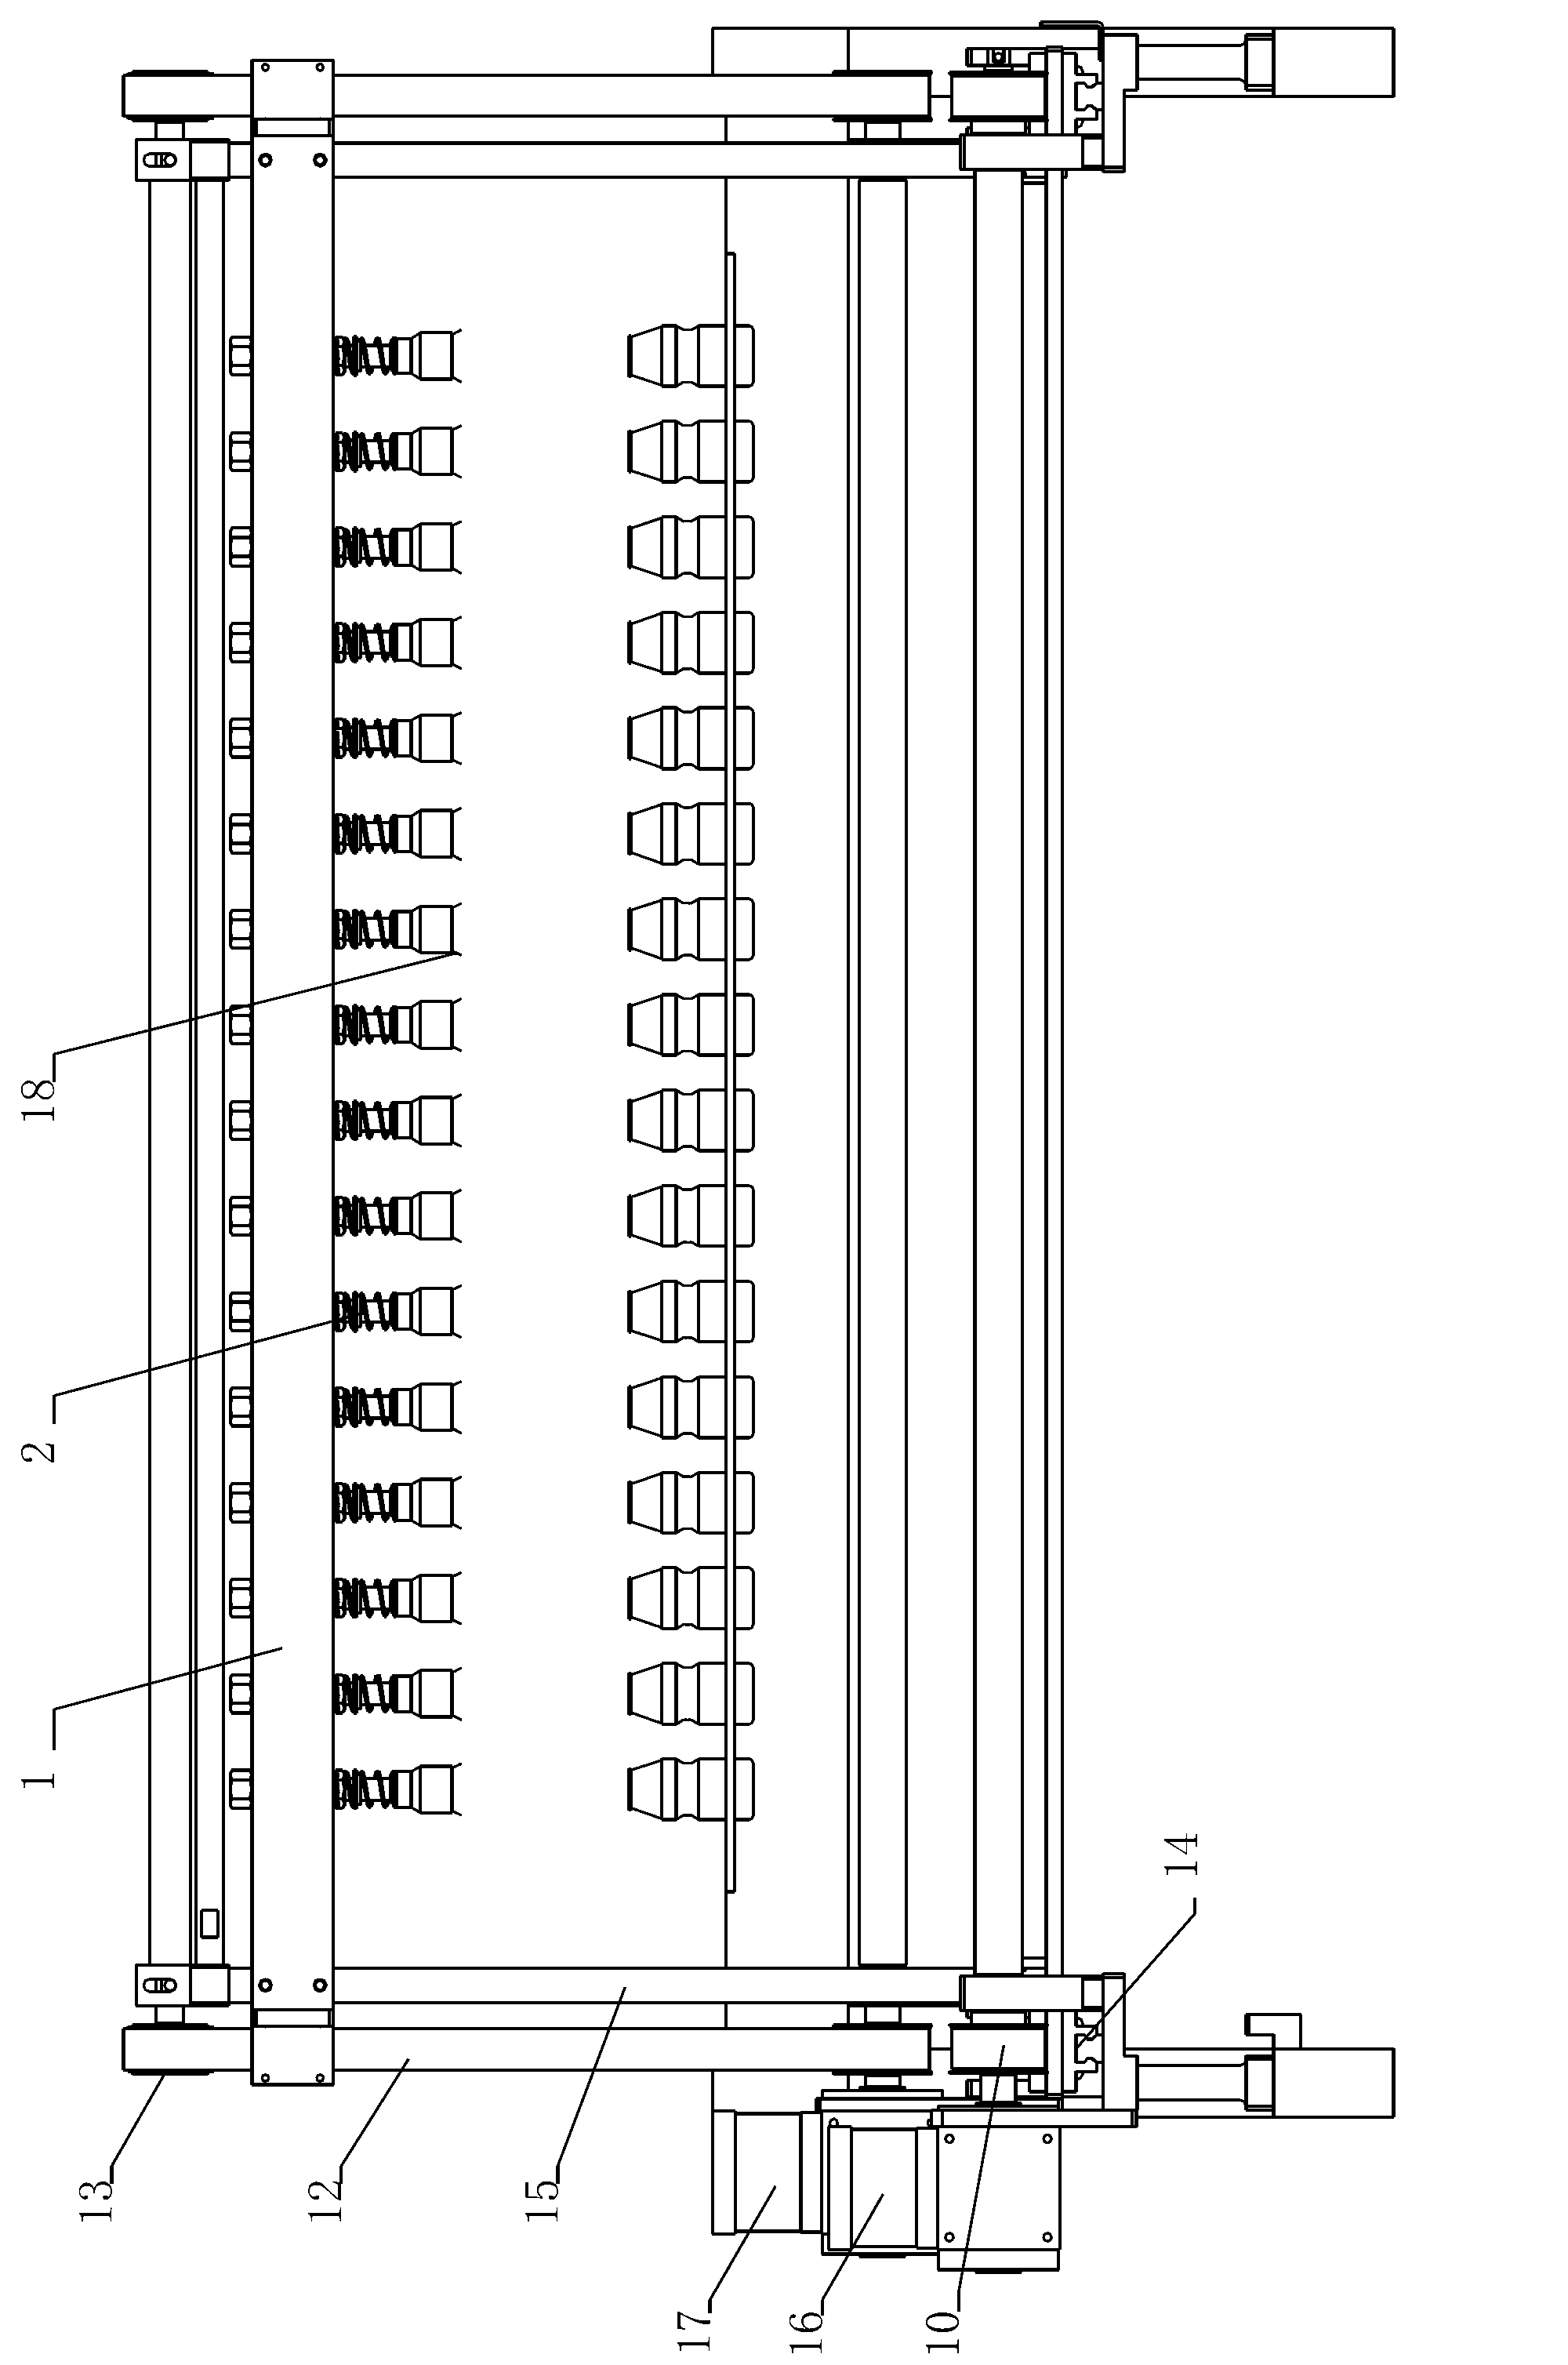 Capping device for filling container